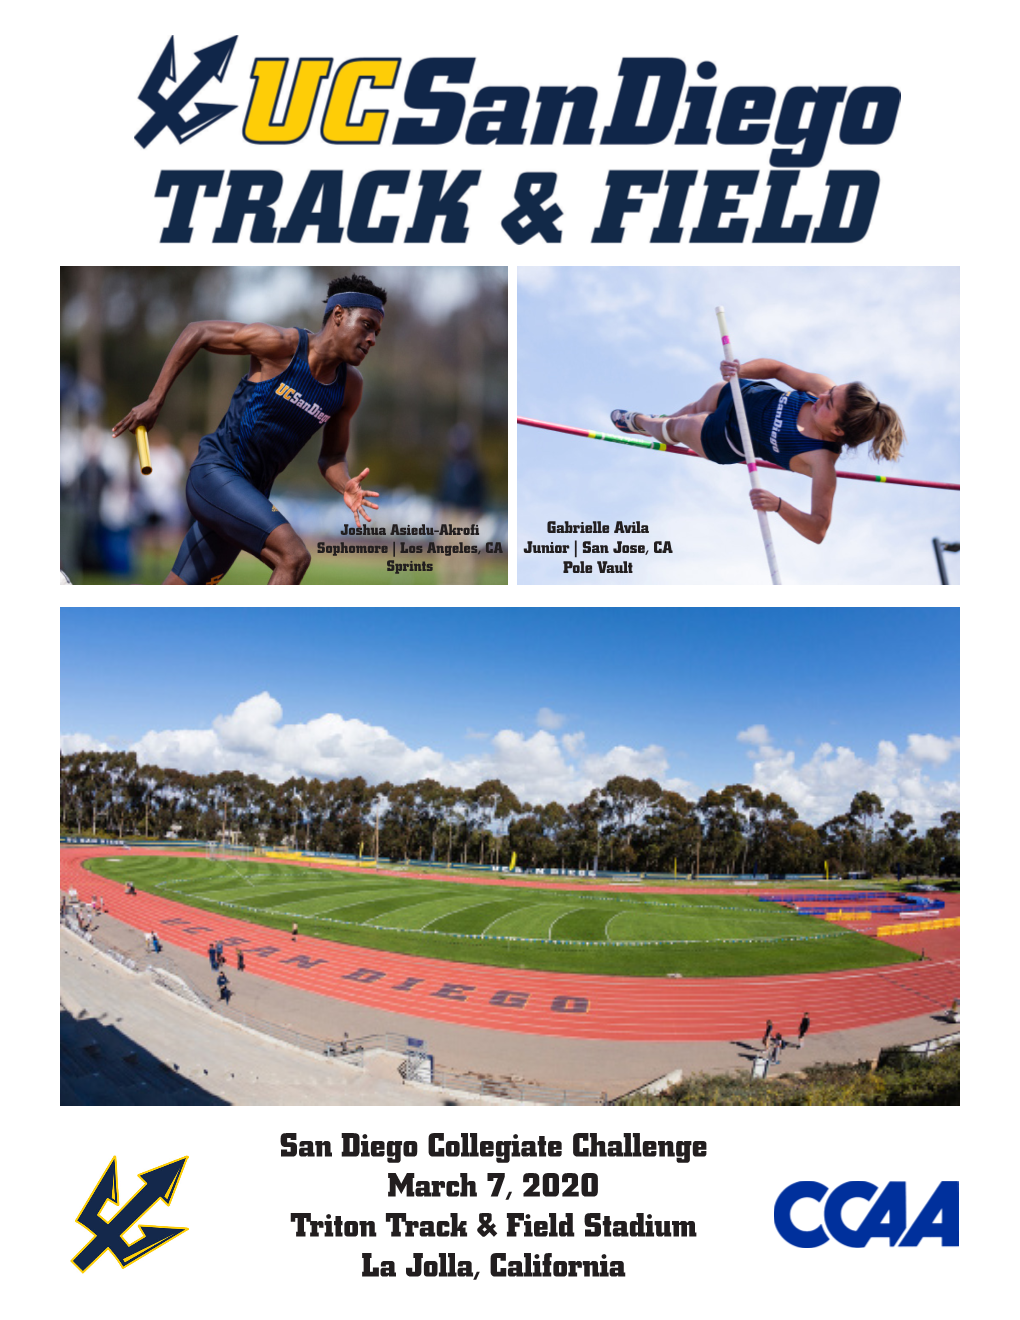 San Diego Collegiate Track and Field Challenge